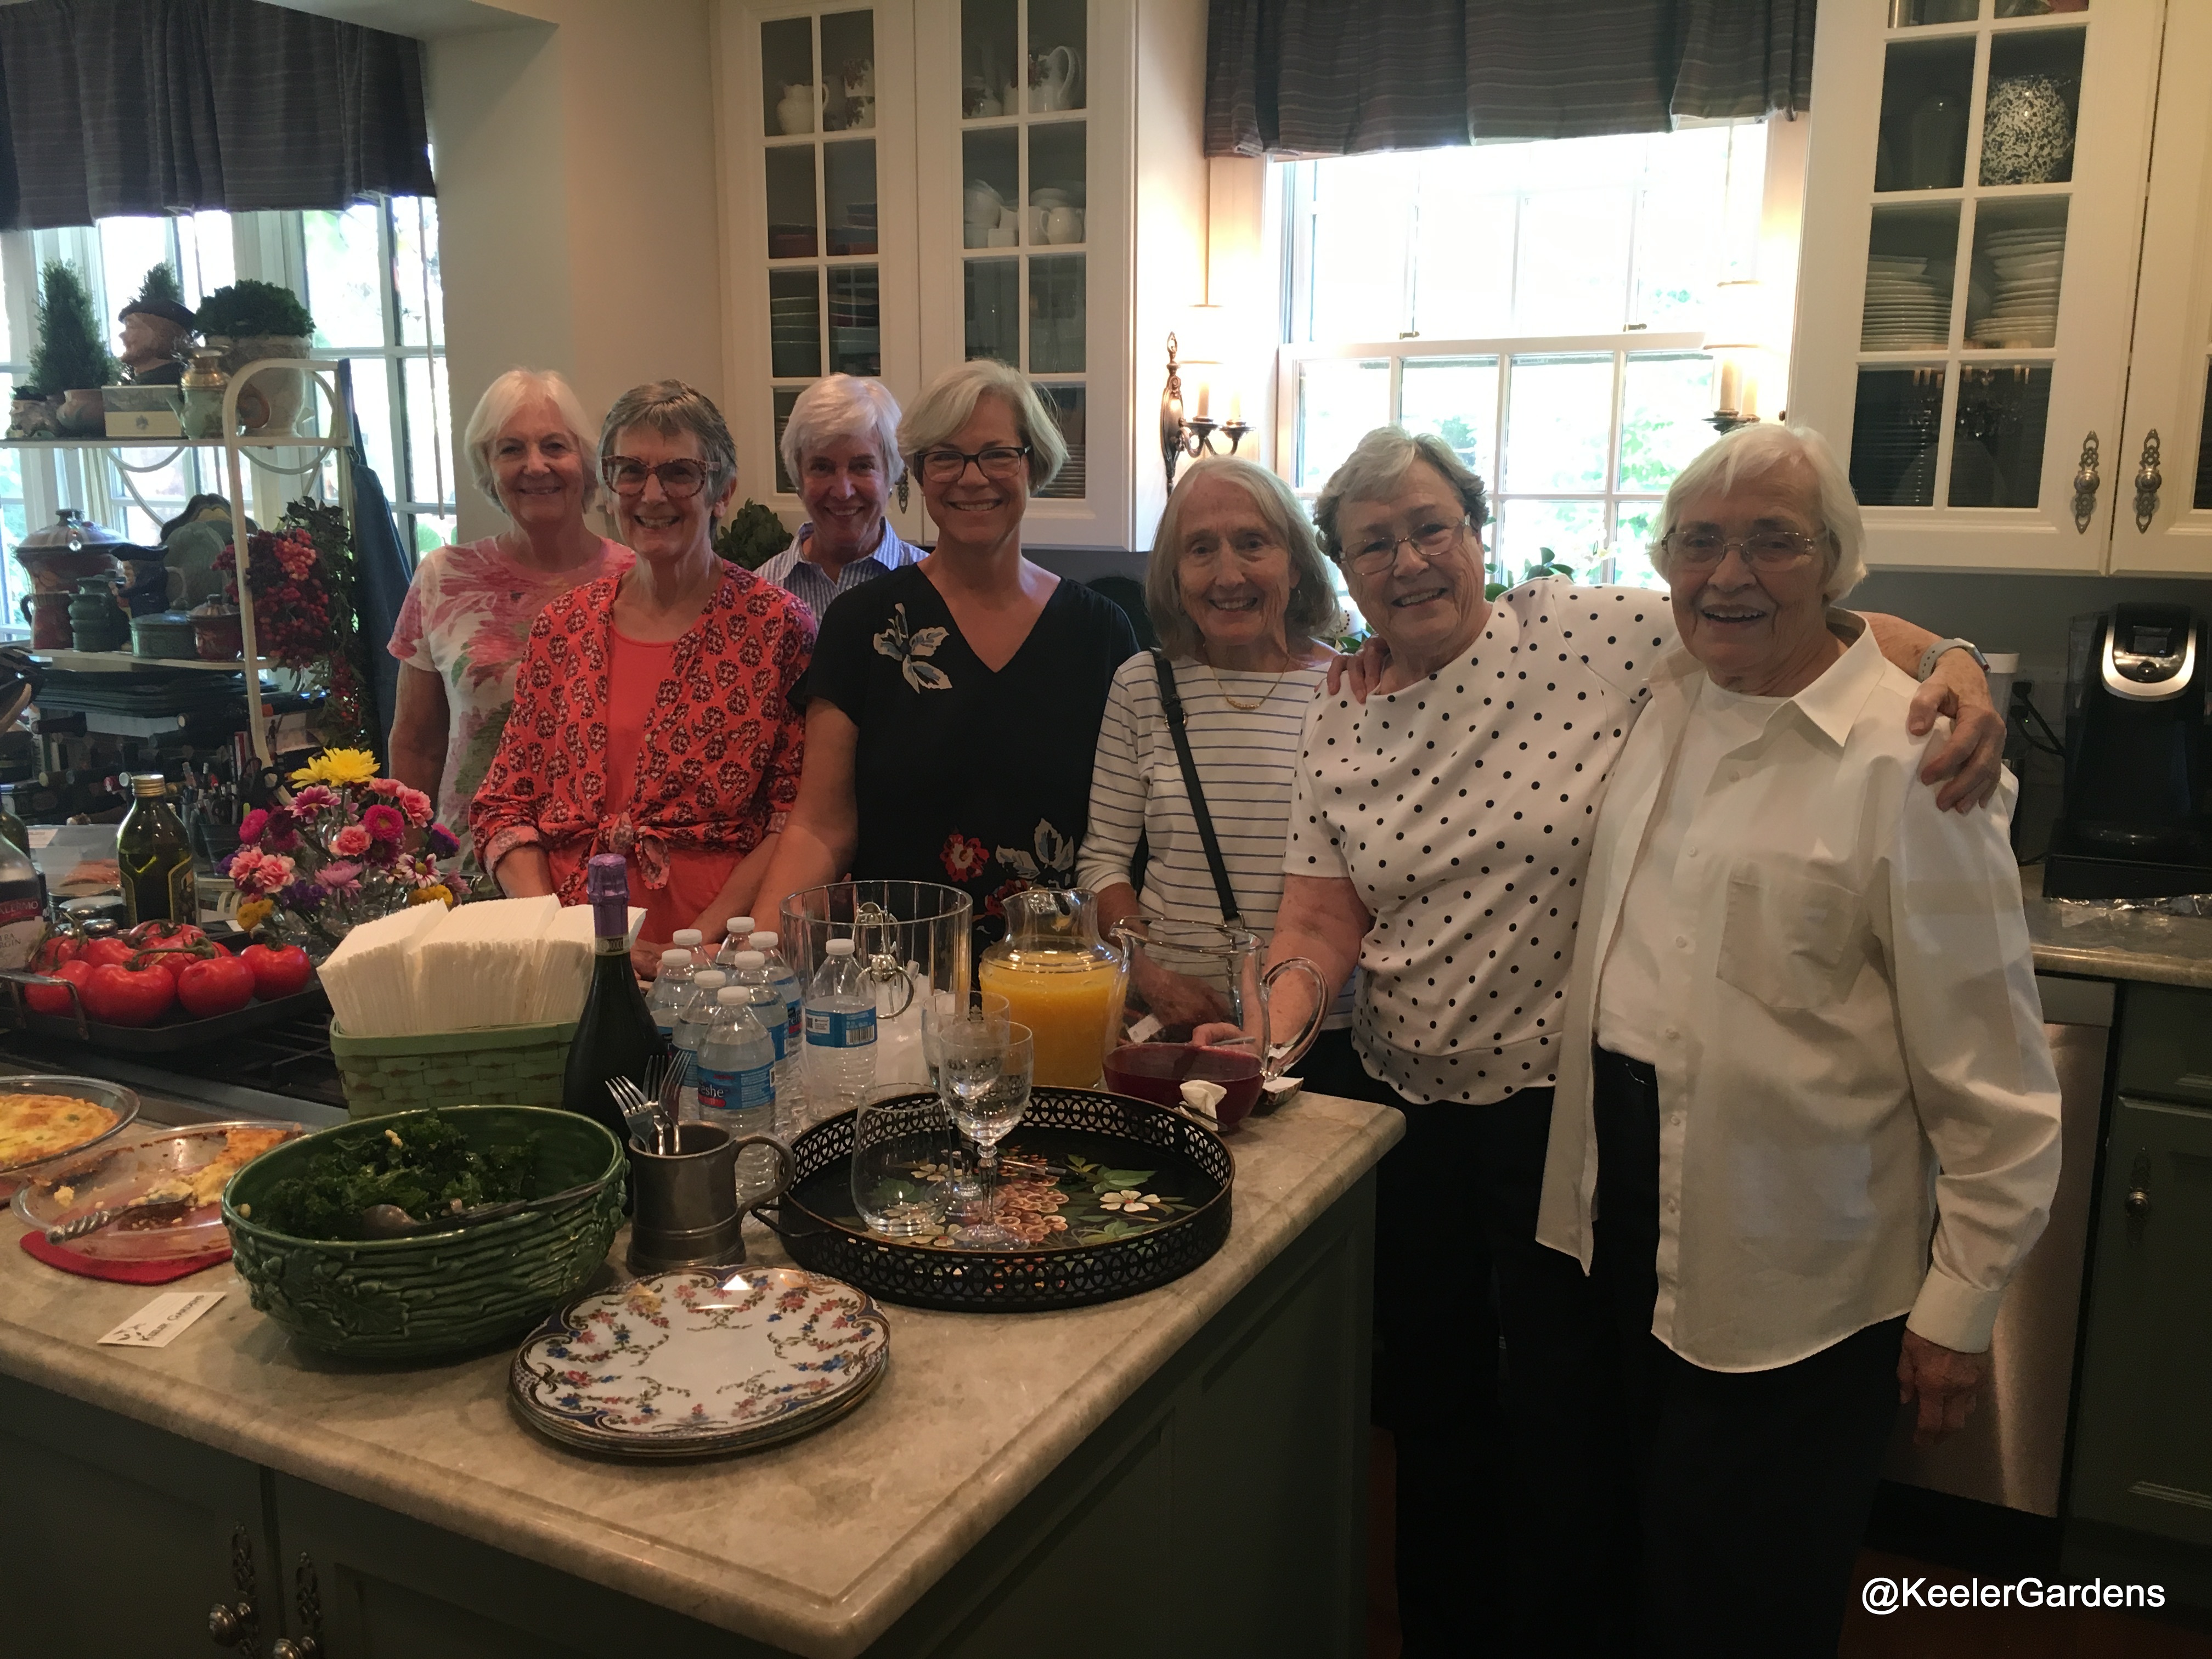 A group of ladies poses for a picture in a well appointed kitchen. On the island there is a bountiful display of food and beverage.